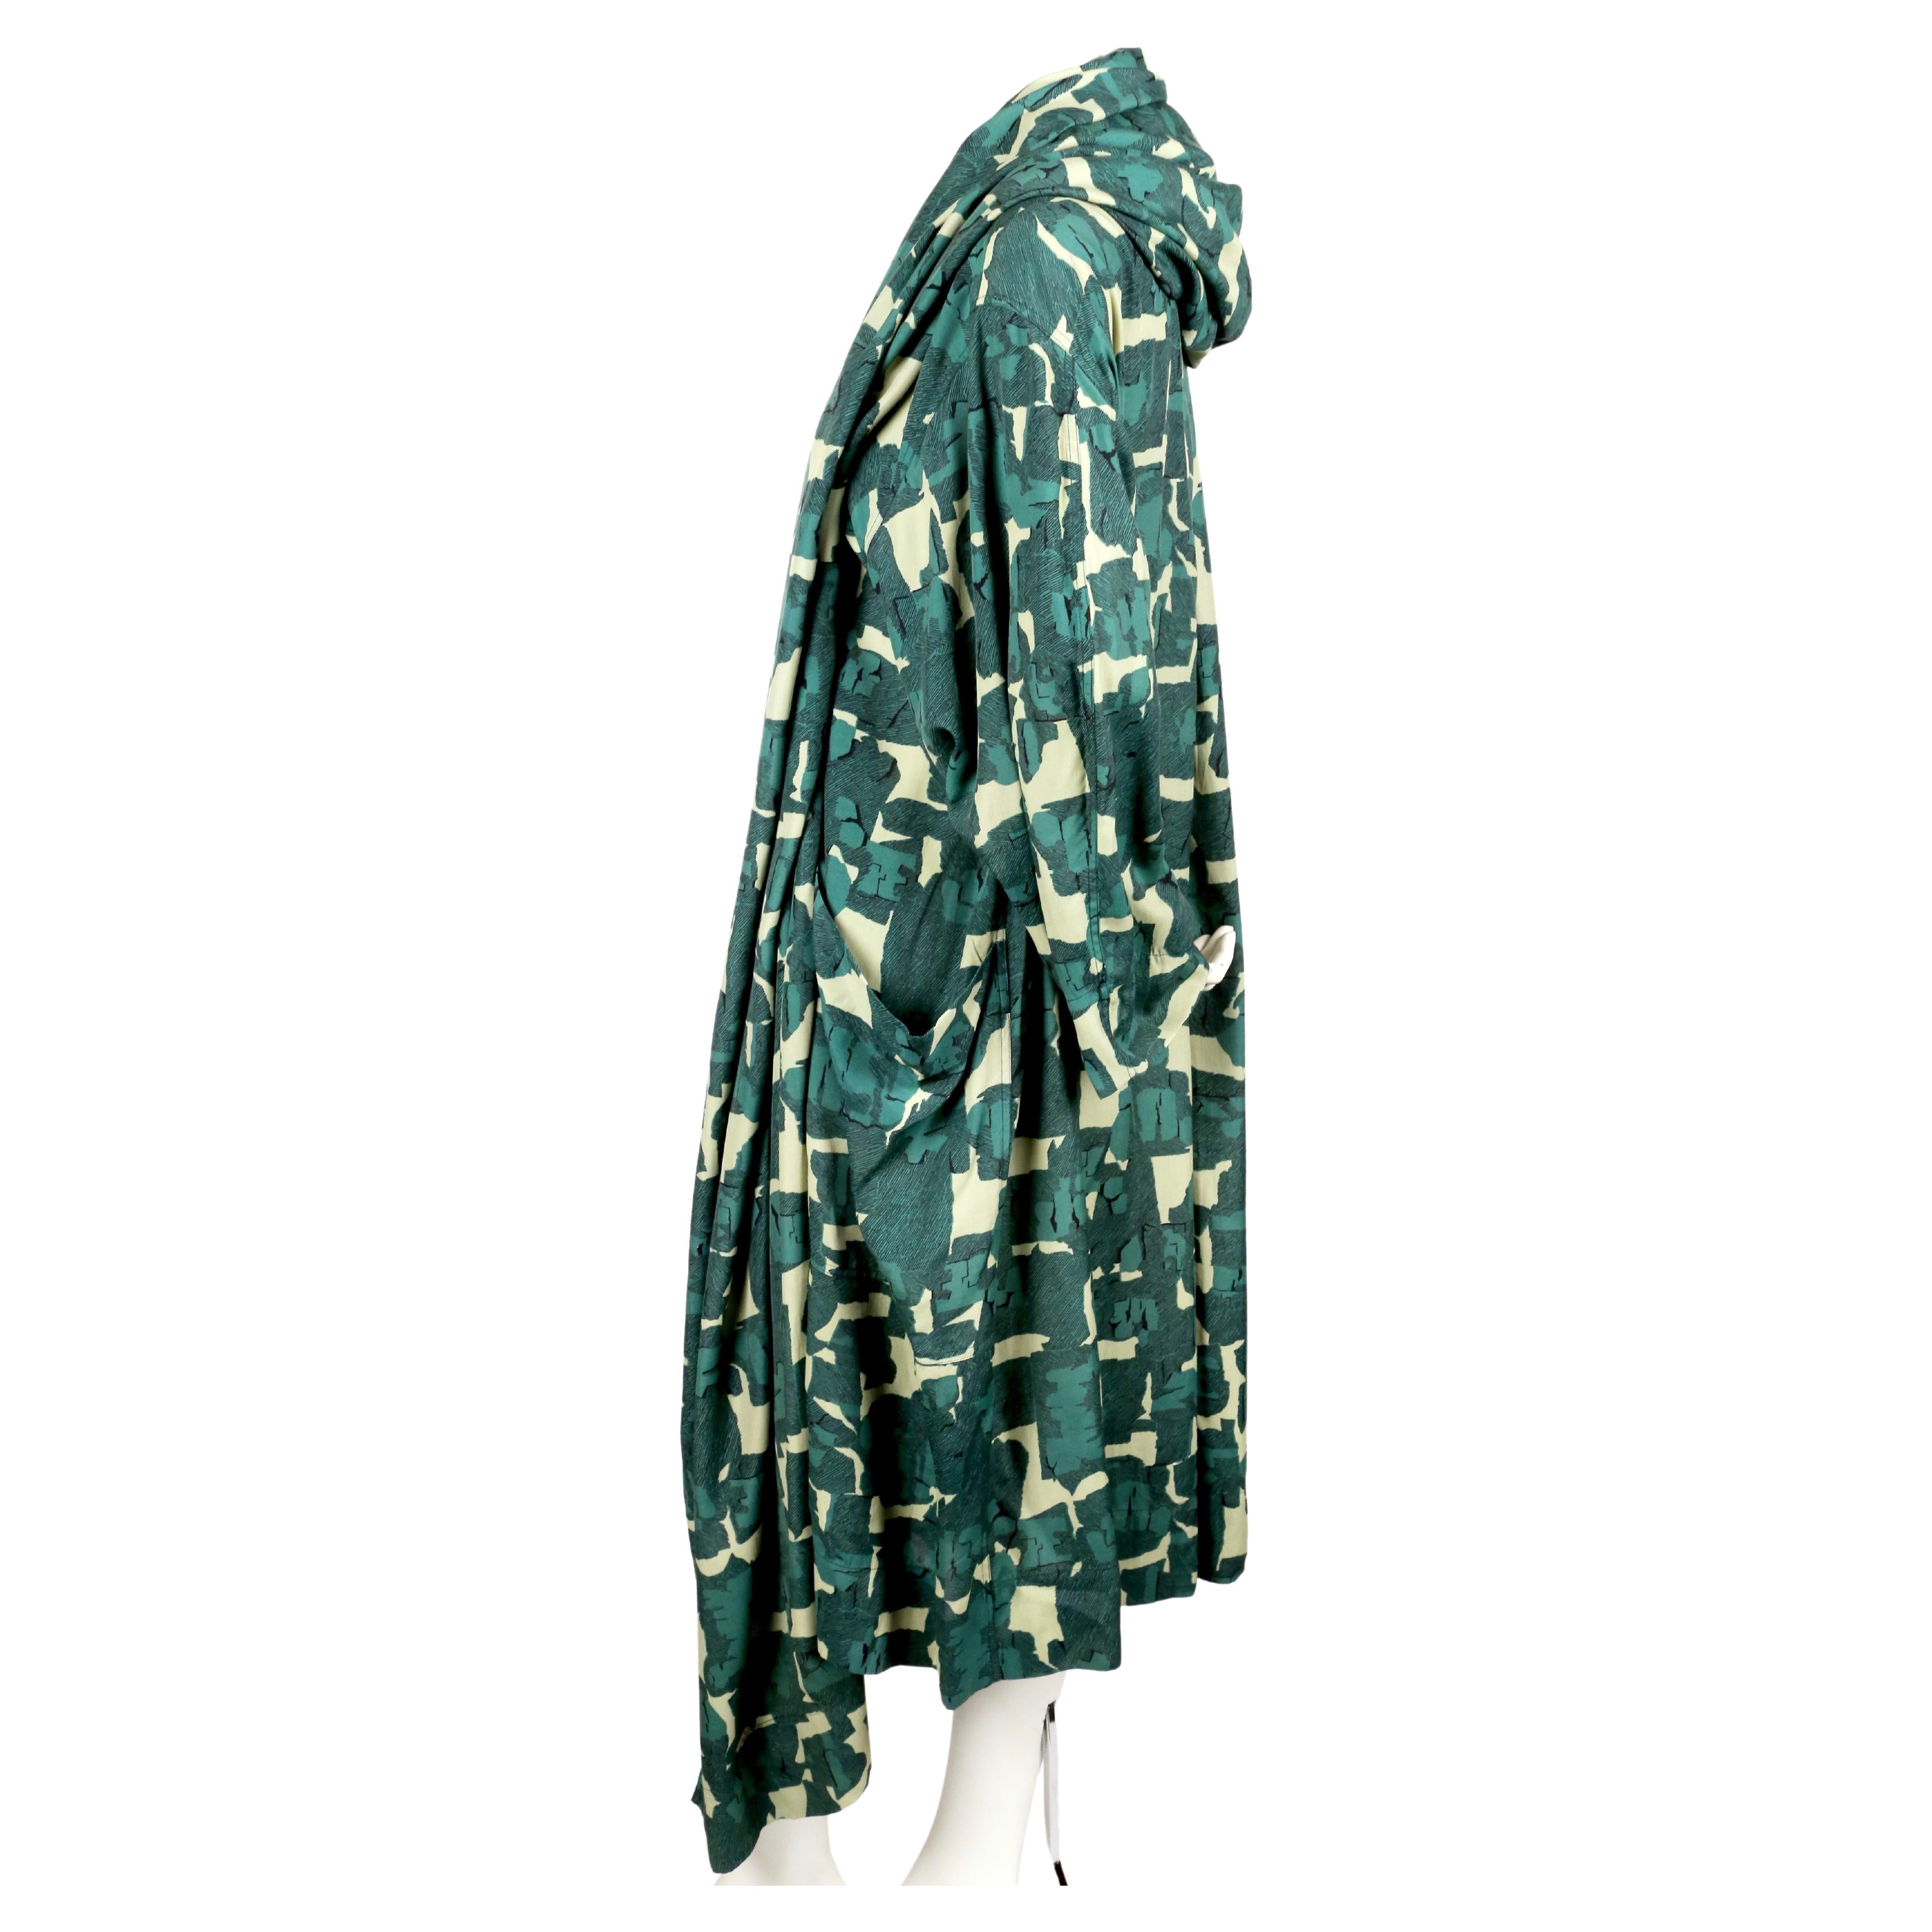 Very rare, abstract-printed kimono with large hood and wrap around pockets designed by Azzedine Alaia with artwork by Christoph Von Weyhe dating to 1985 as seen on the runway. French size 38 however this piece is very oversized so it will fit most